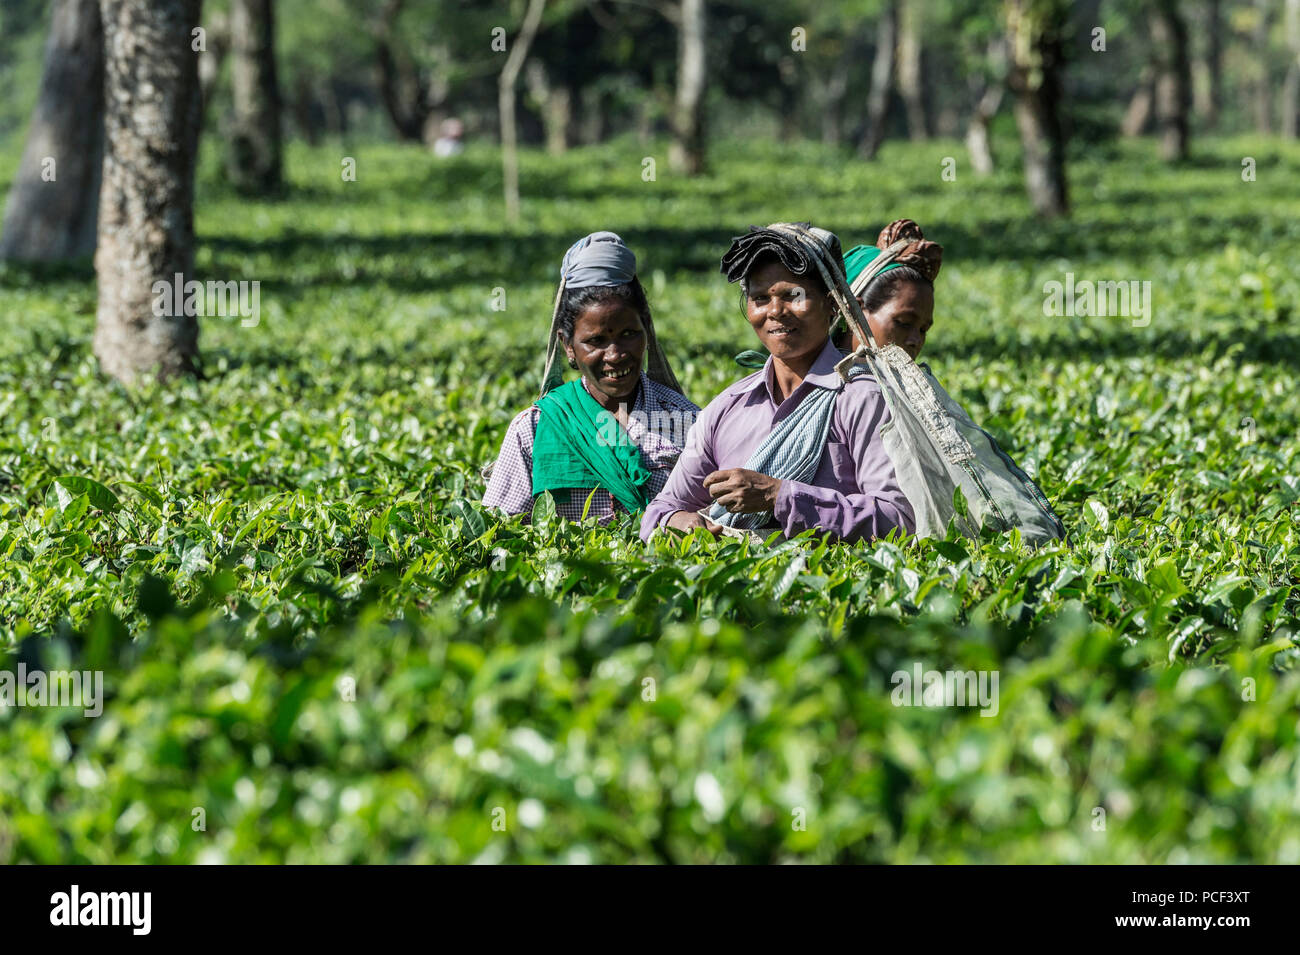 Indian women picking tea leaves, For editorial Use only, Assam, India Stock Photo